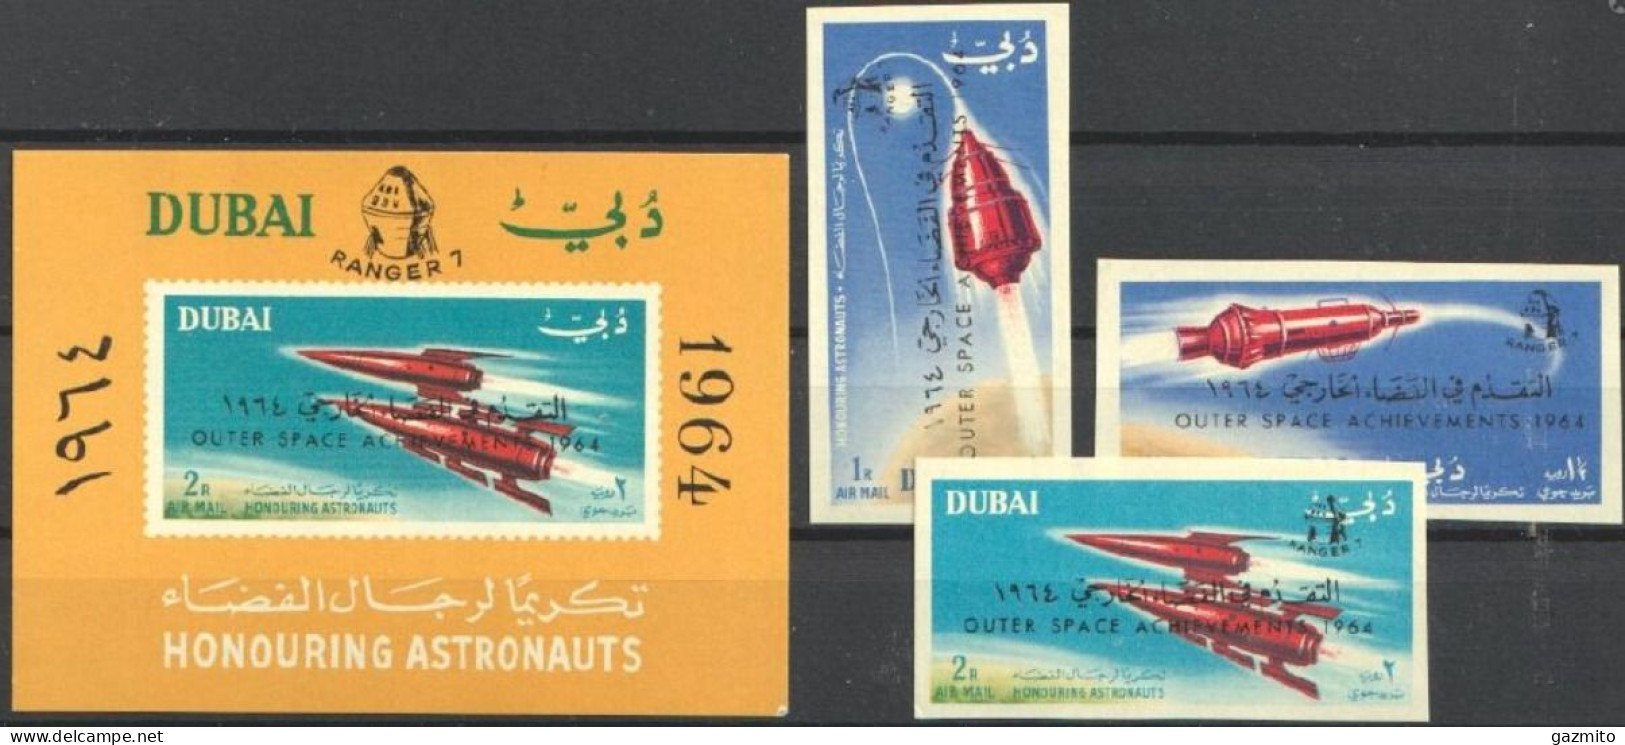 Dubai 1964, Space, Overp. Outer Space Achievement 1964, 3val+BF IMPERFORATED - Asia